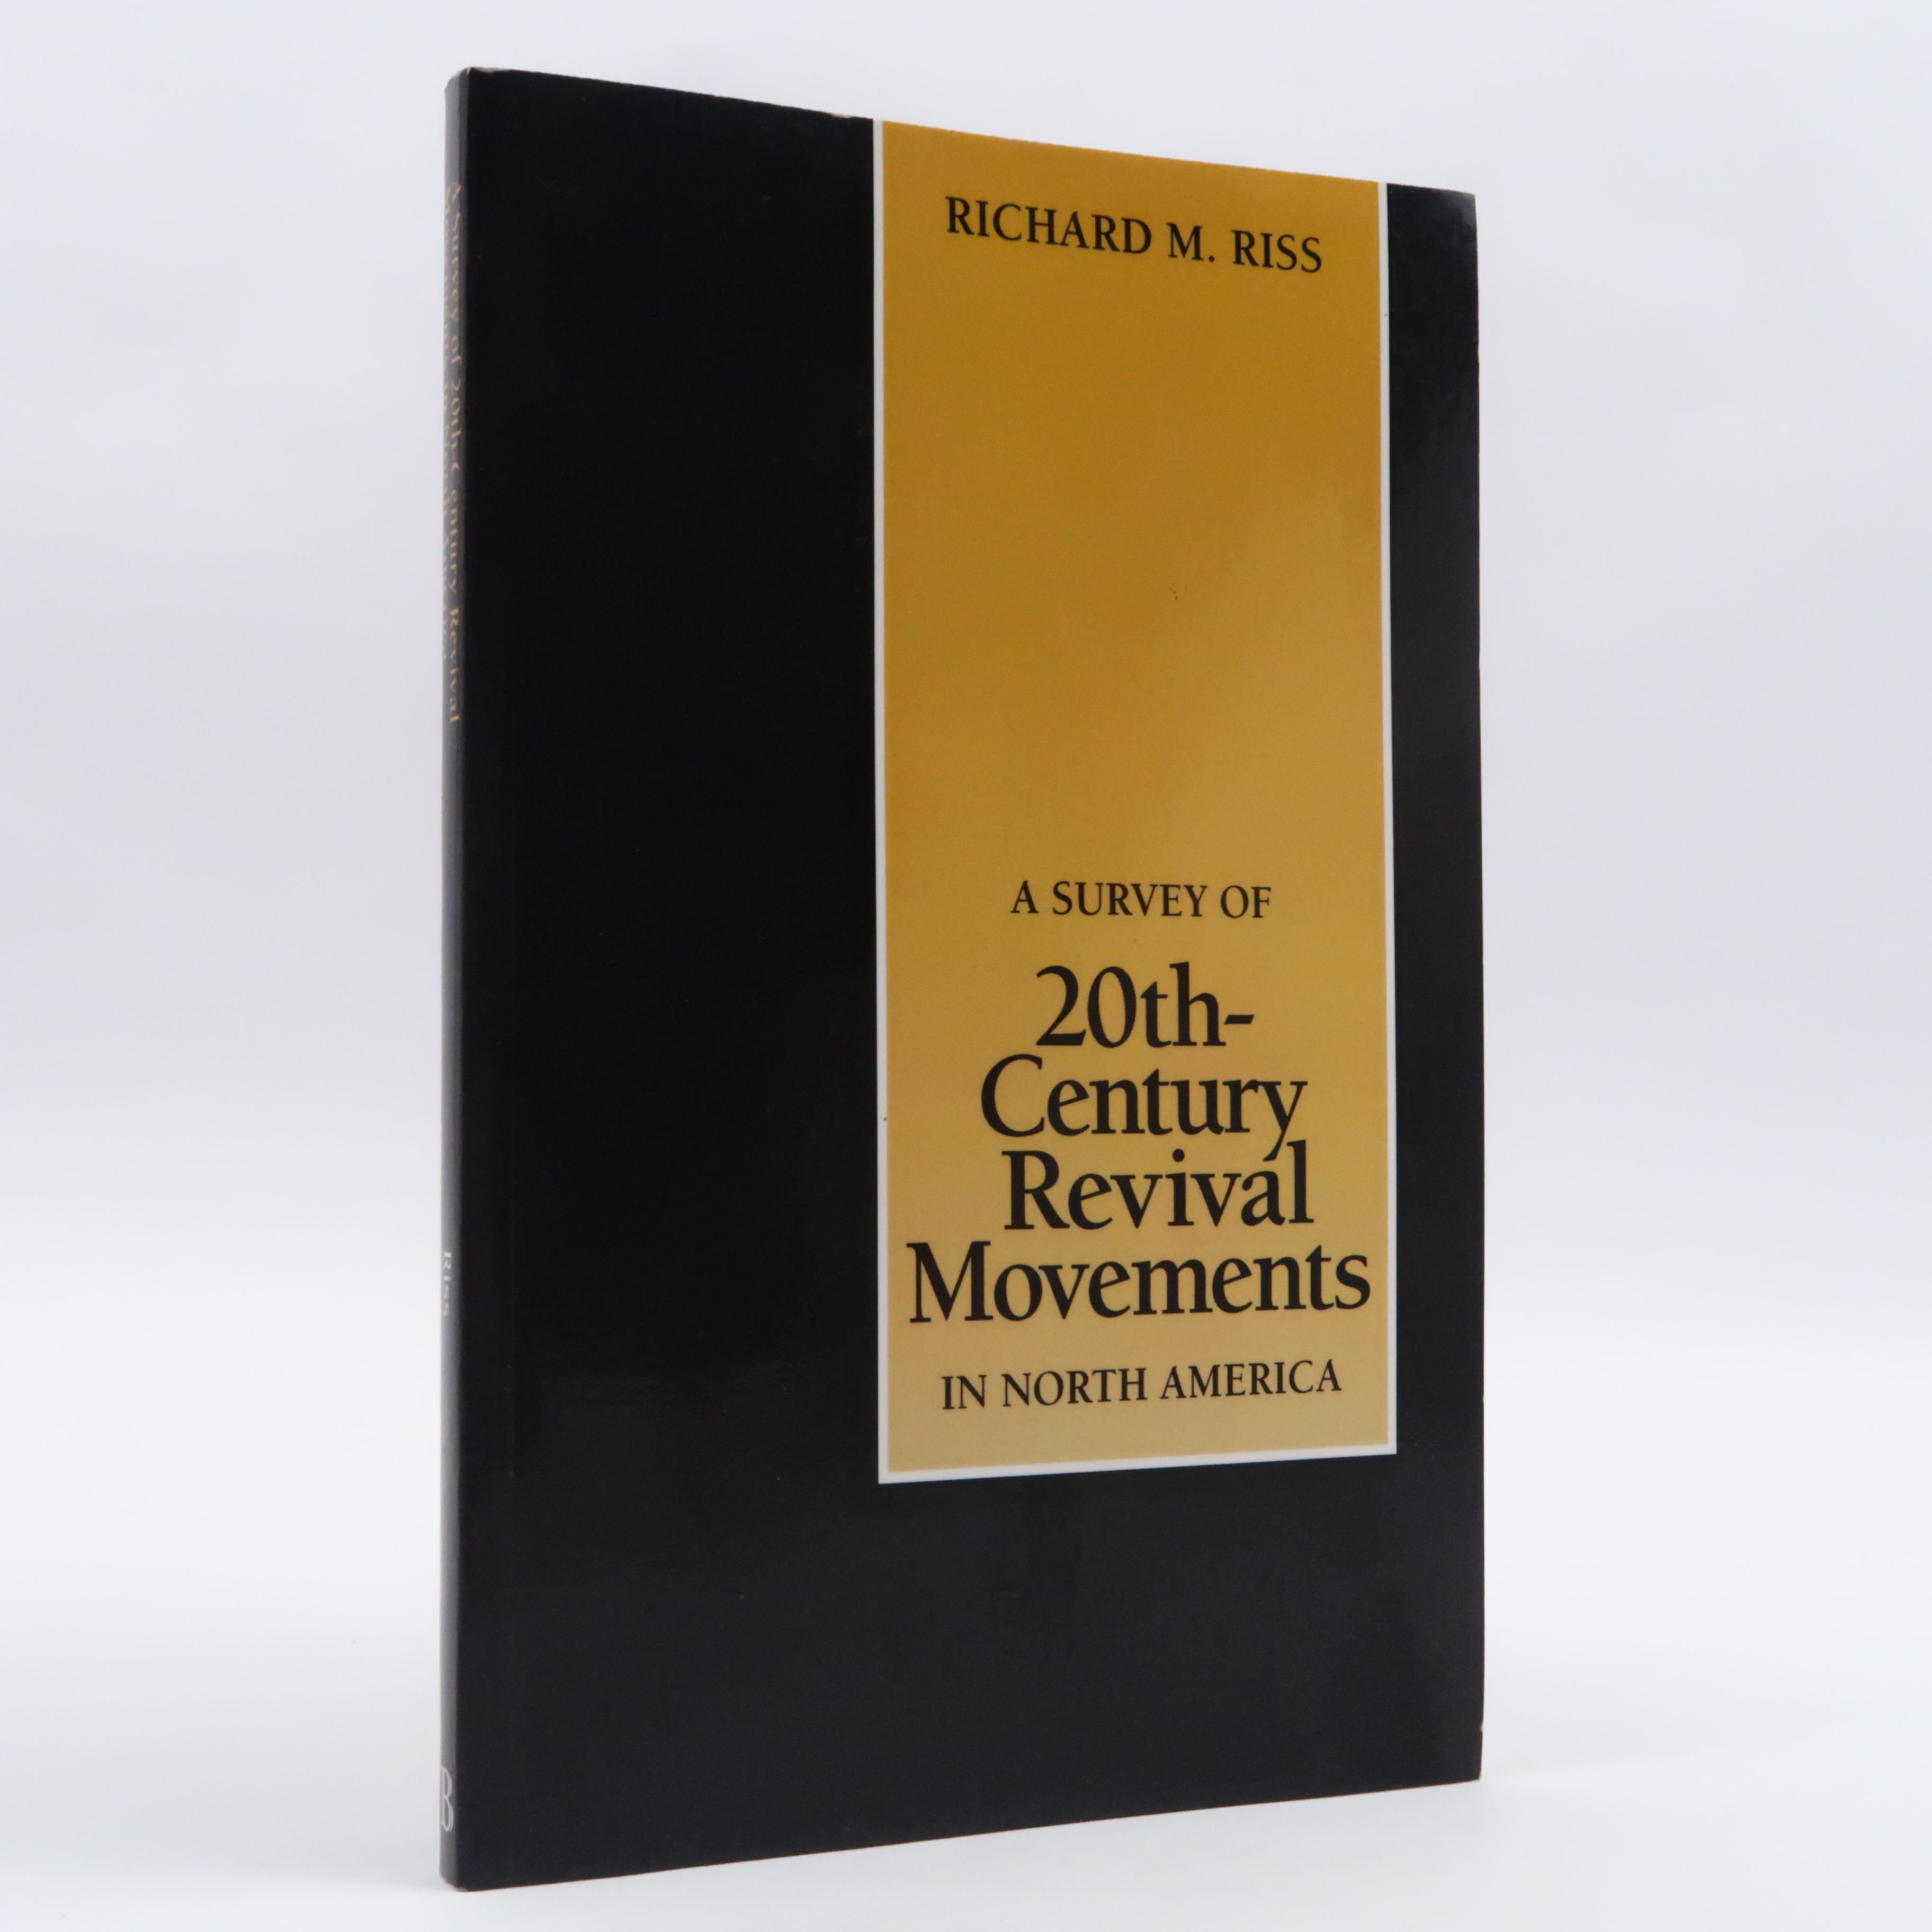 A Survey of 20th-Century Revival Movements in North America by Richard M. Riss - Riss, Richard M.